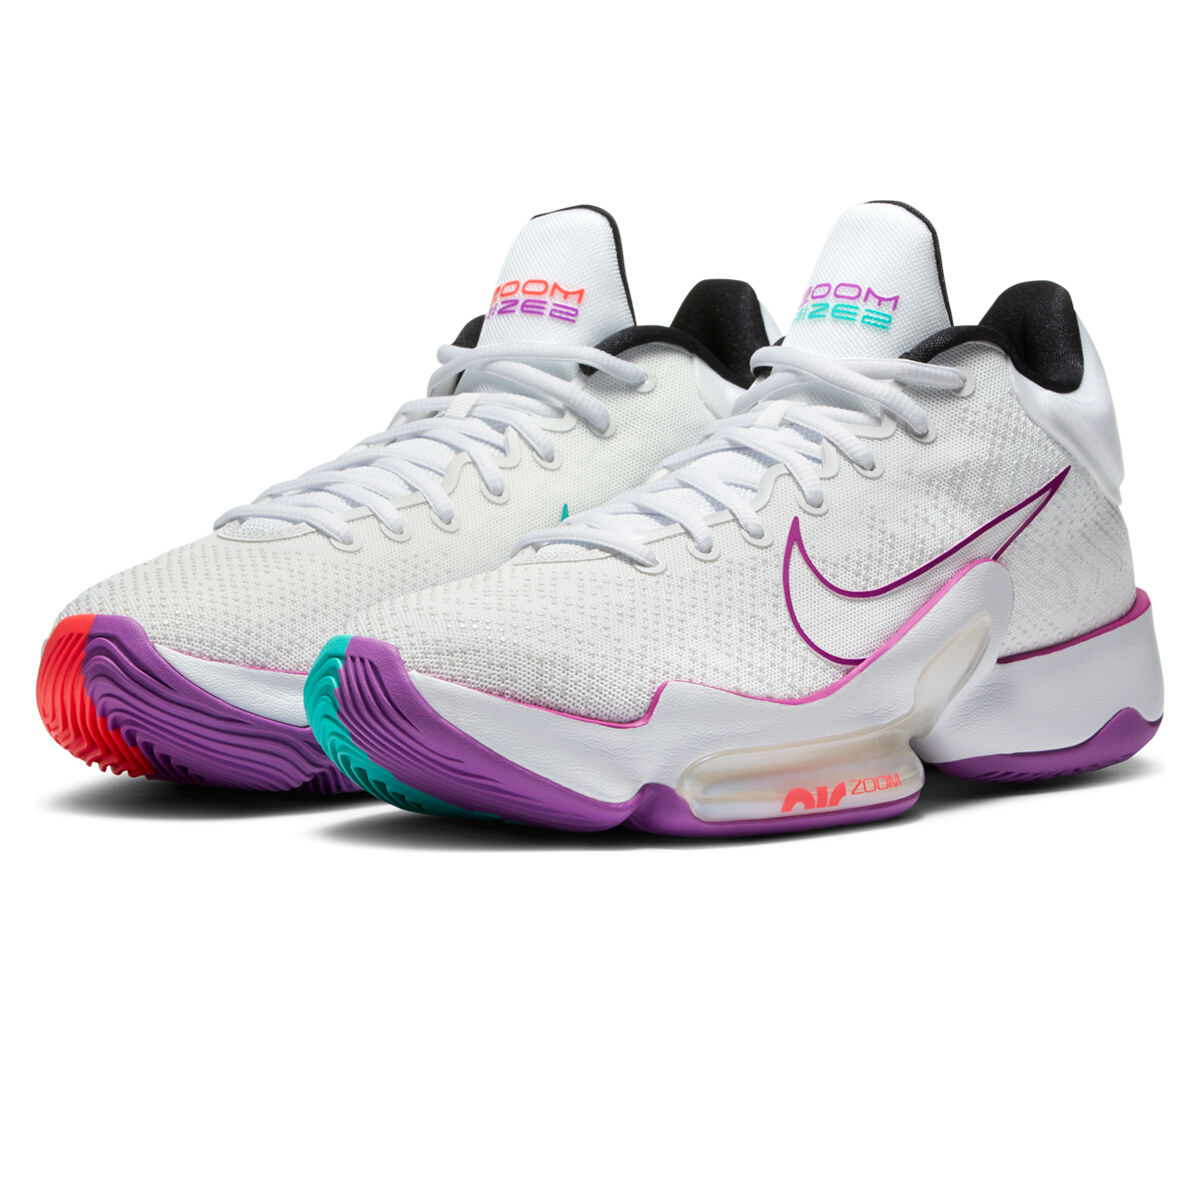 air zoom rize 2